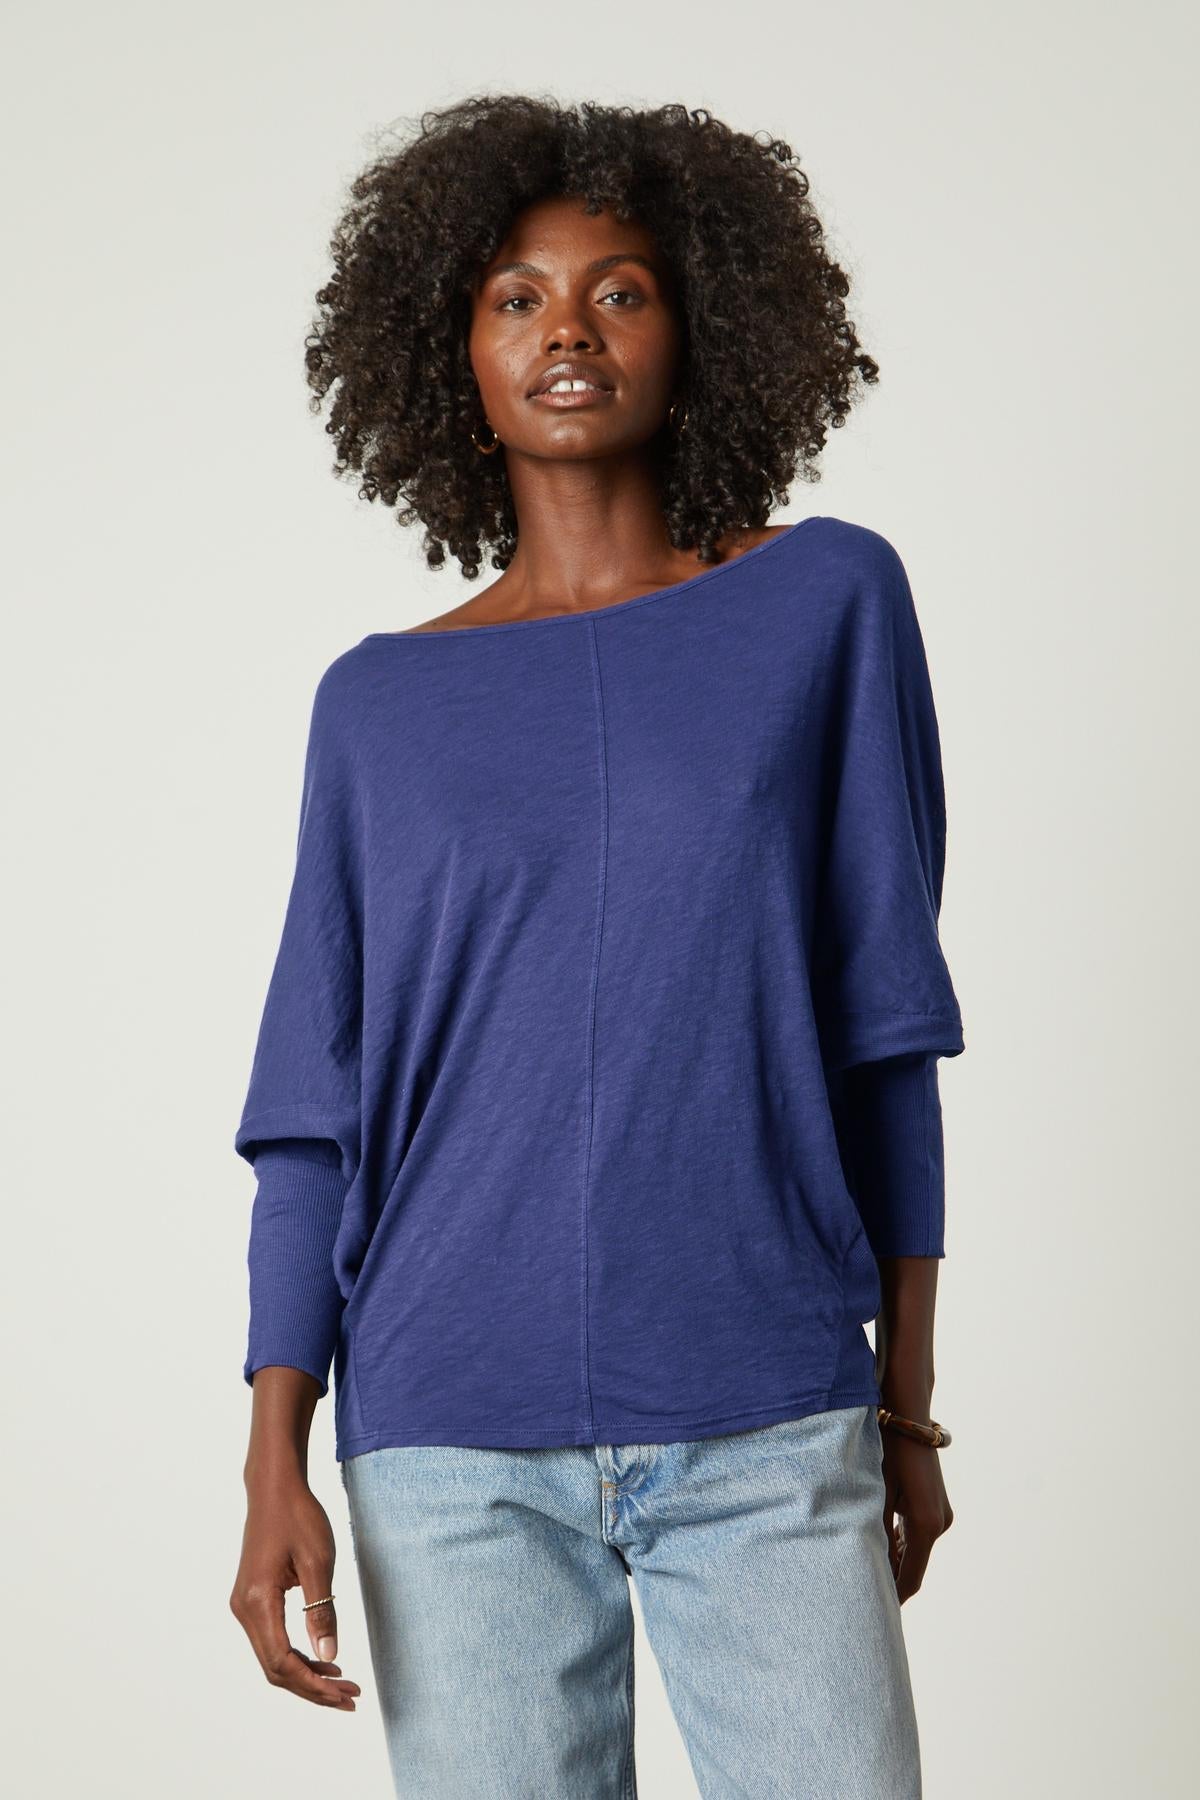 A woman wearing jeans and a Velvet by Graham & Spencer JOSS DOLMAN SLEEVE TEE.-35206718947521